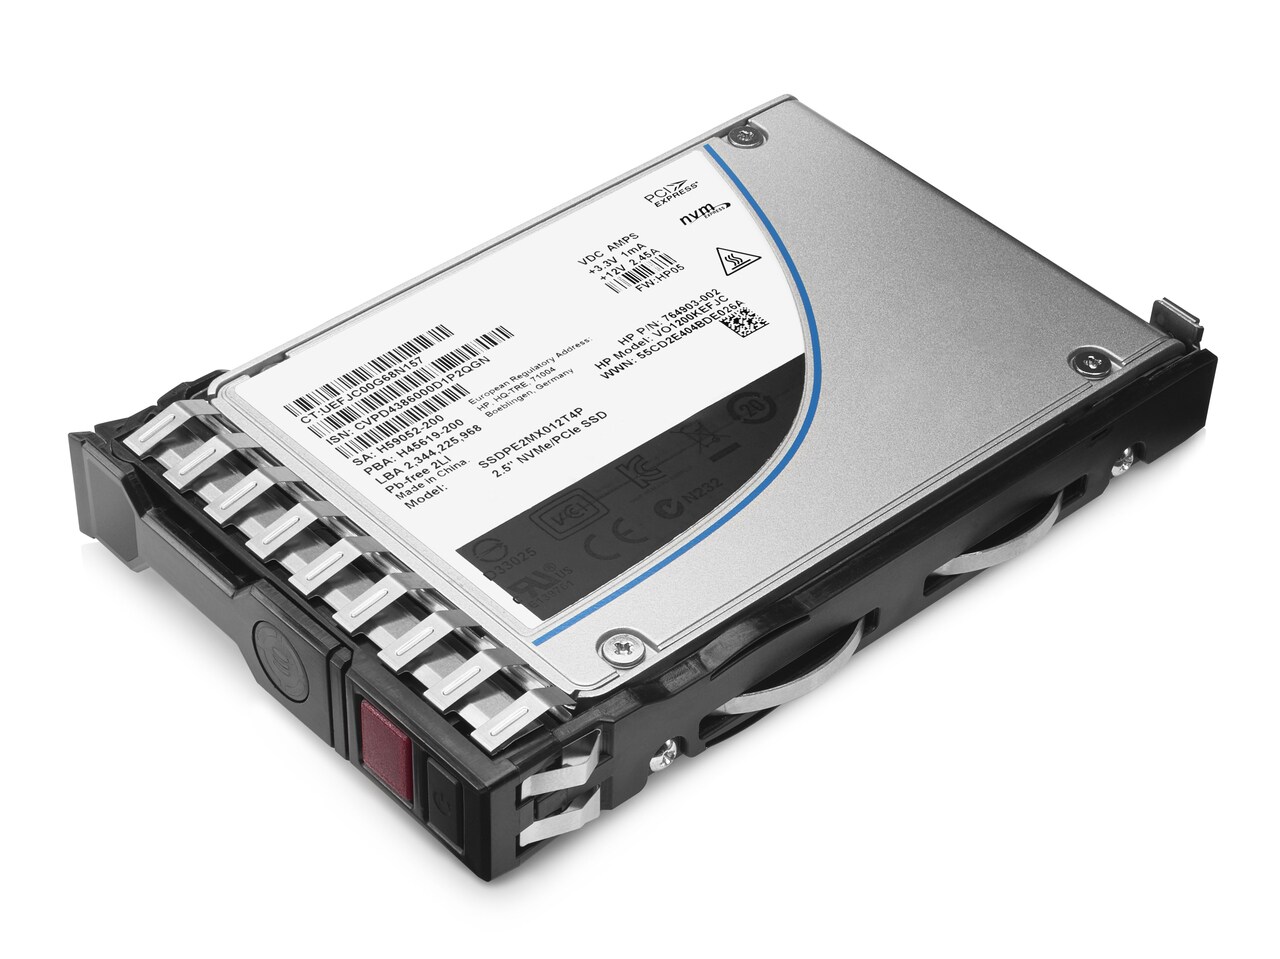 HPE 120GB 3.5" 6G SATA Mixed Use-3 LFF Solid State Drive